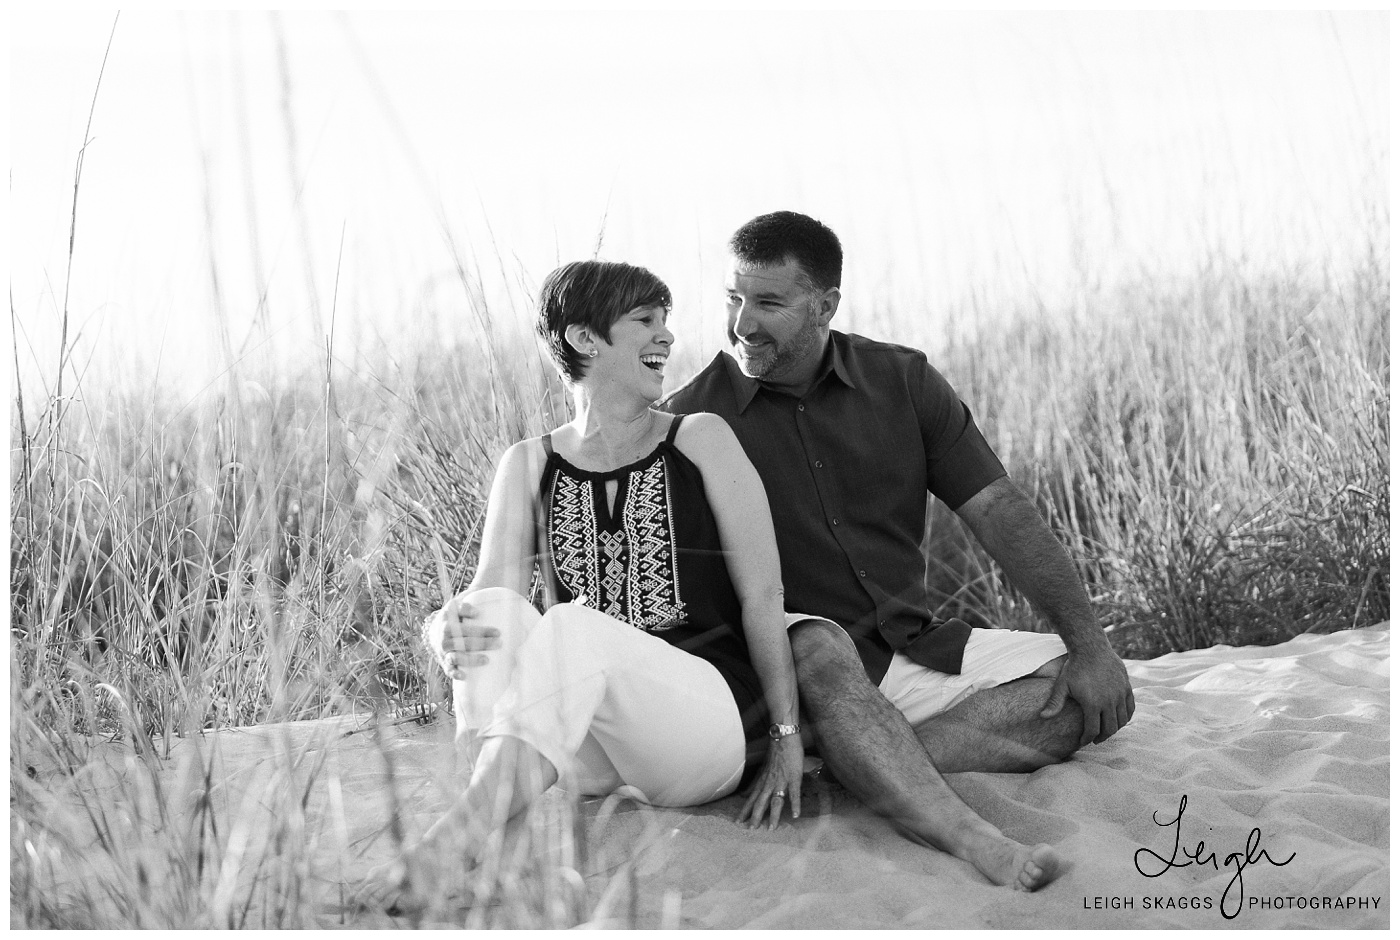 The Cole Family | Ocean View Portraits